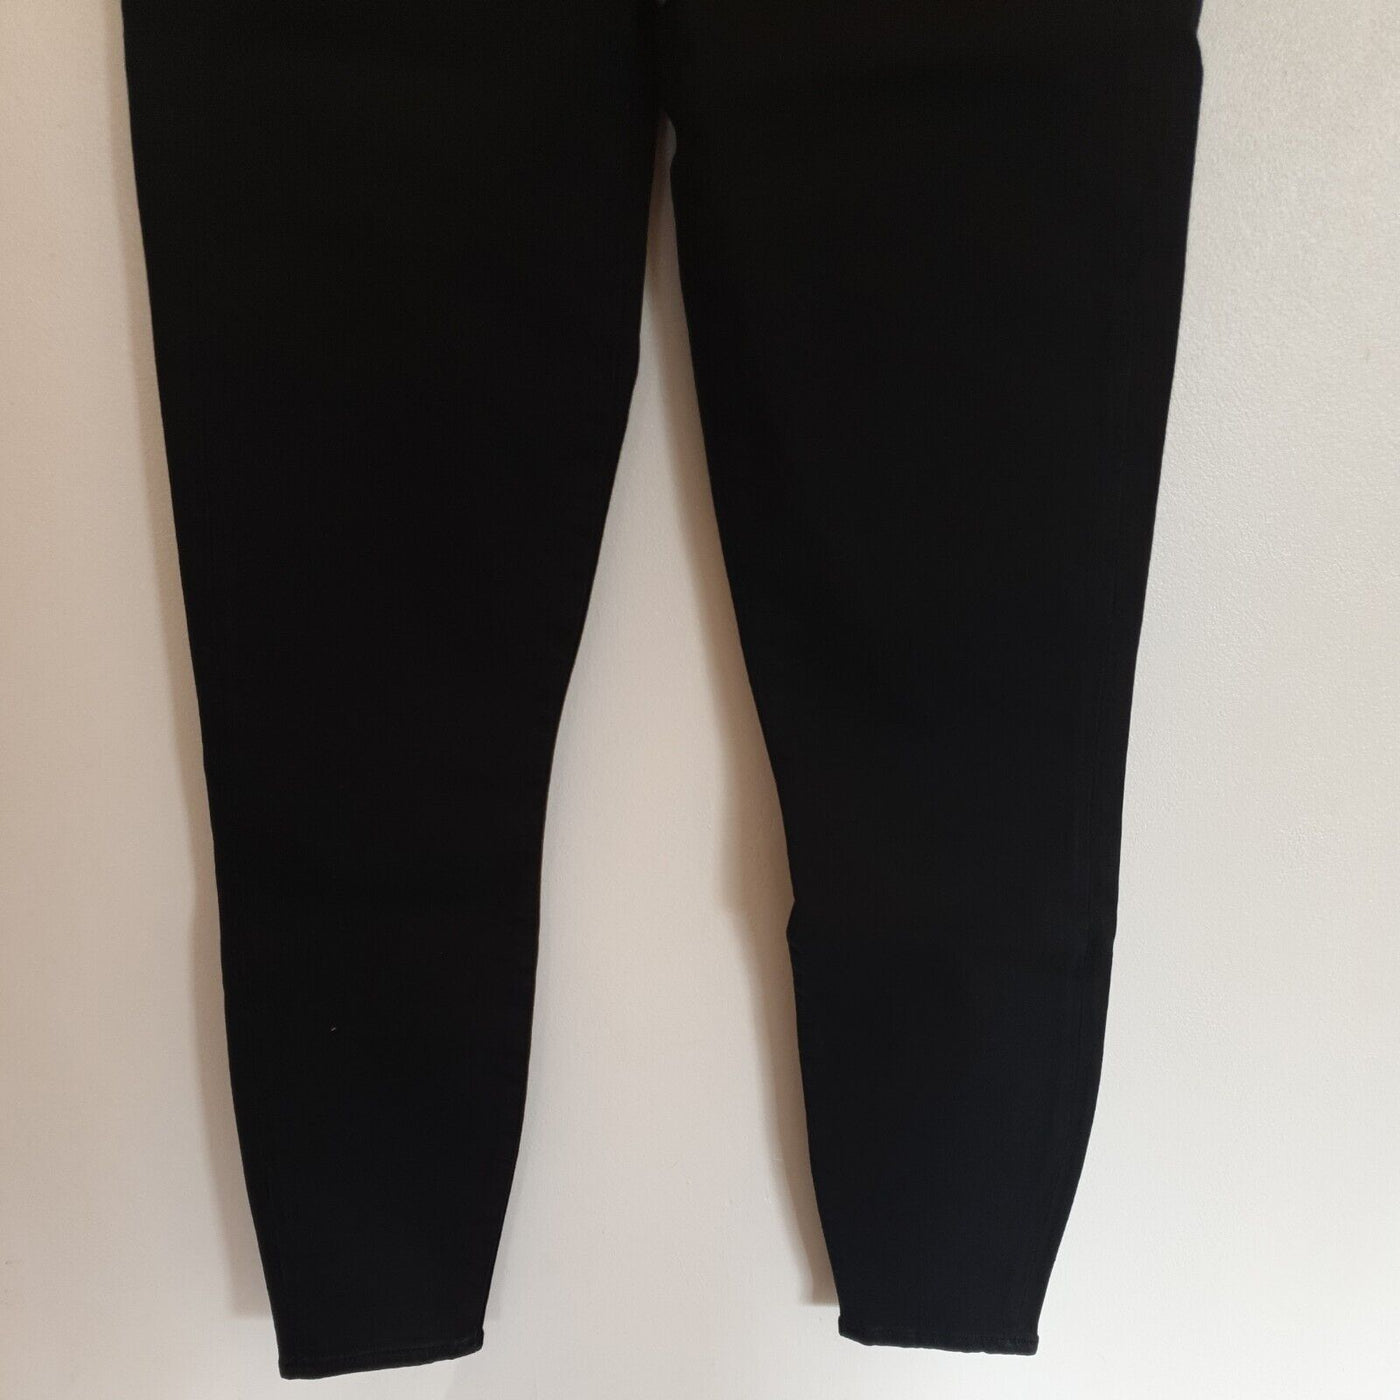 For All Mankind Aubrey Slim Illusion Luxe Gravity Jeans Black Size 26 **** V501